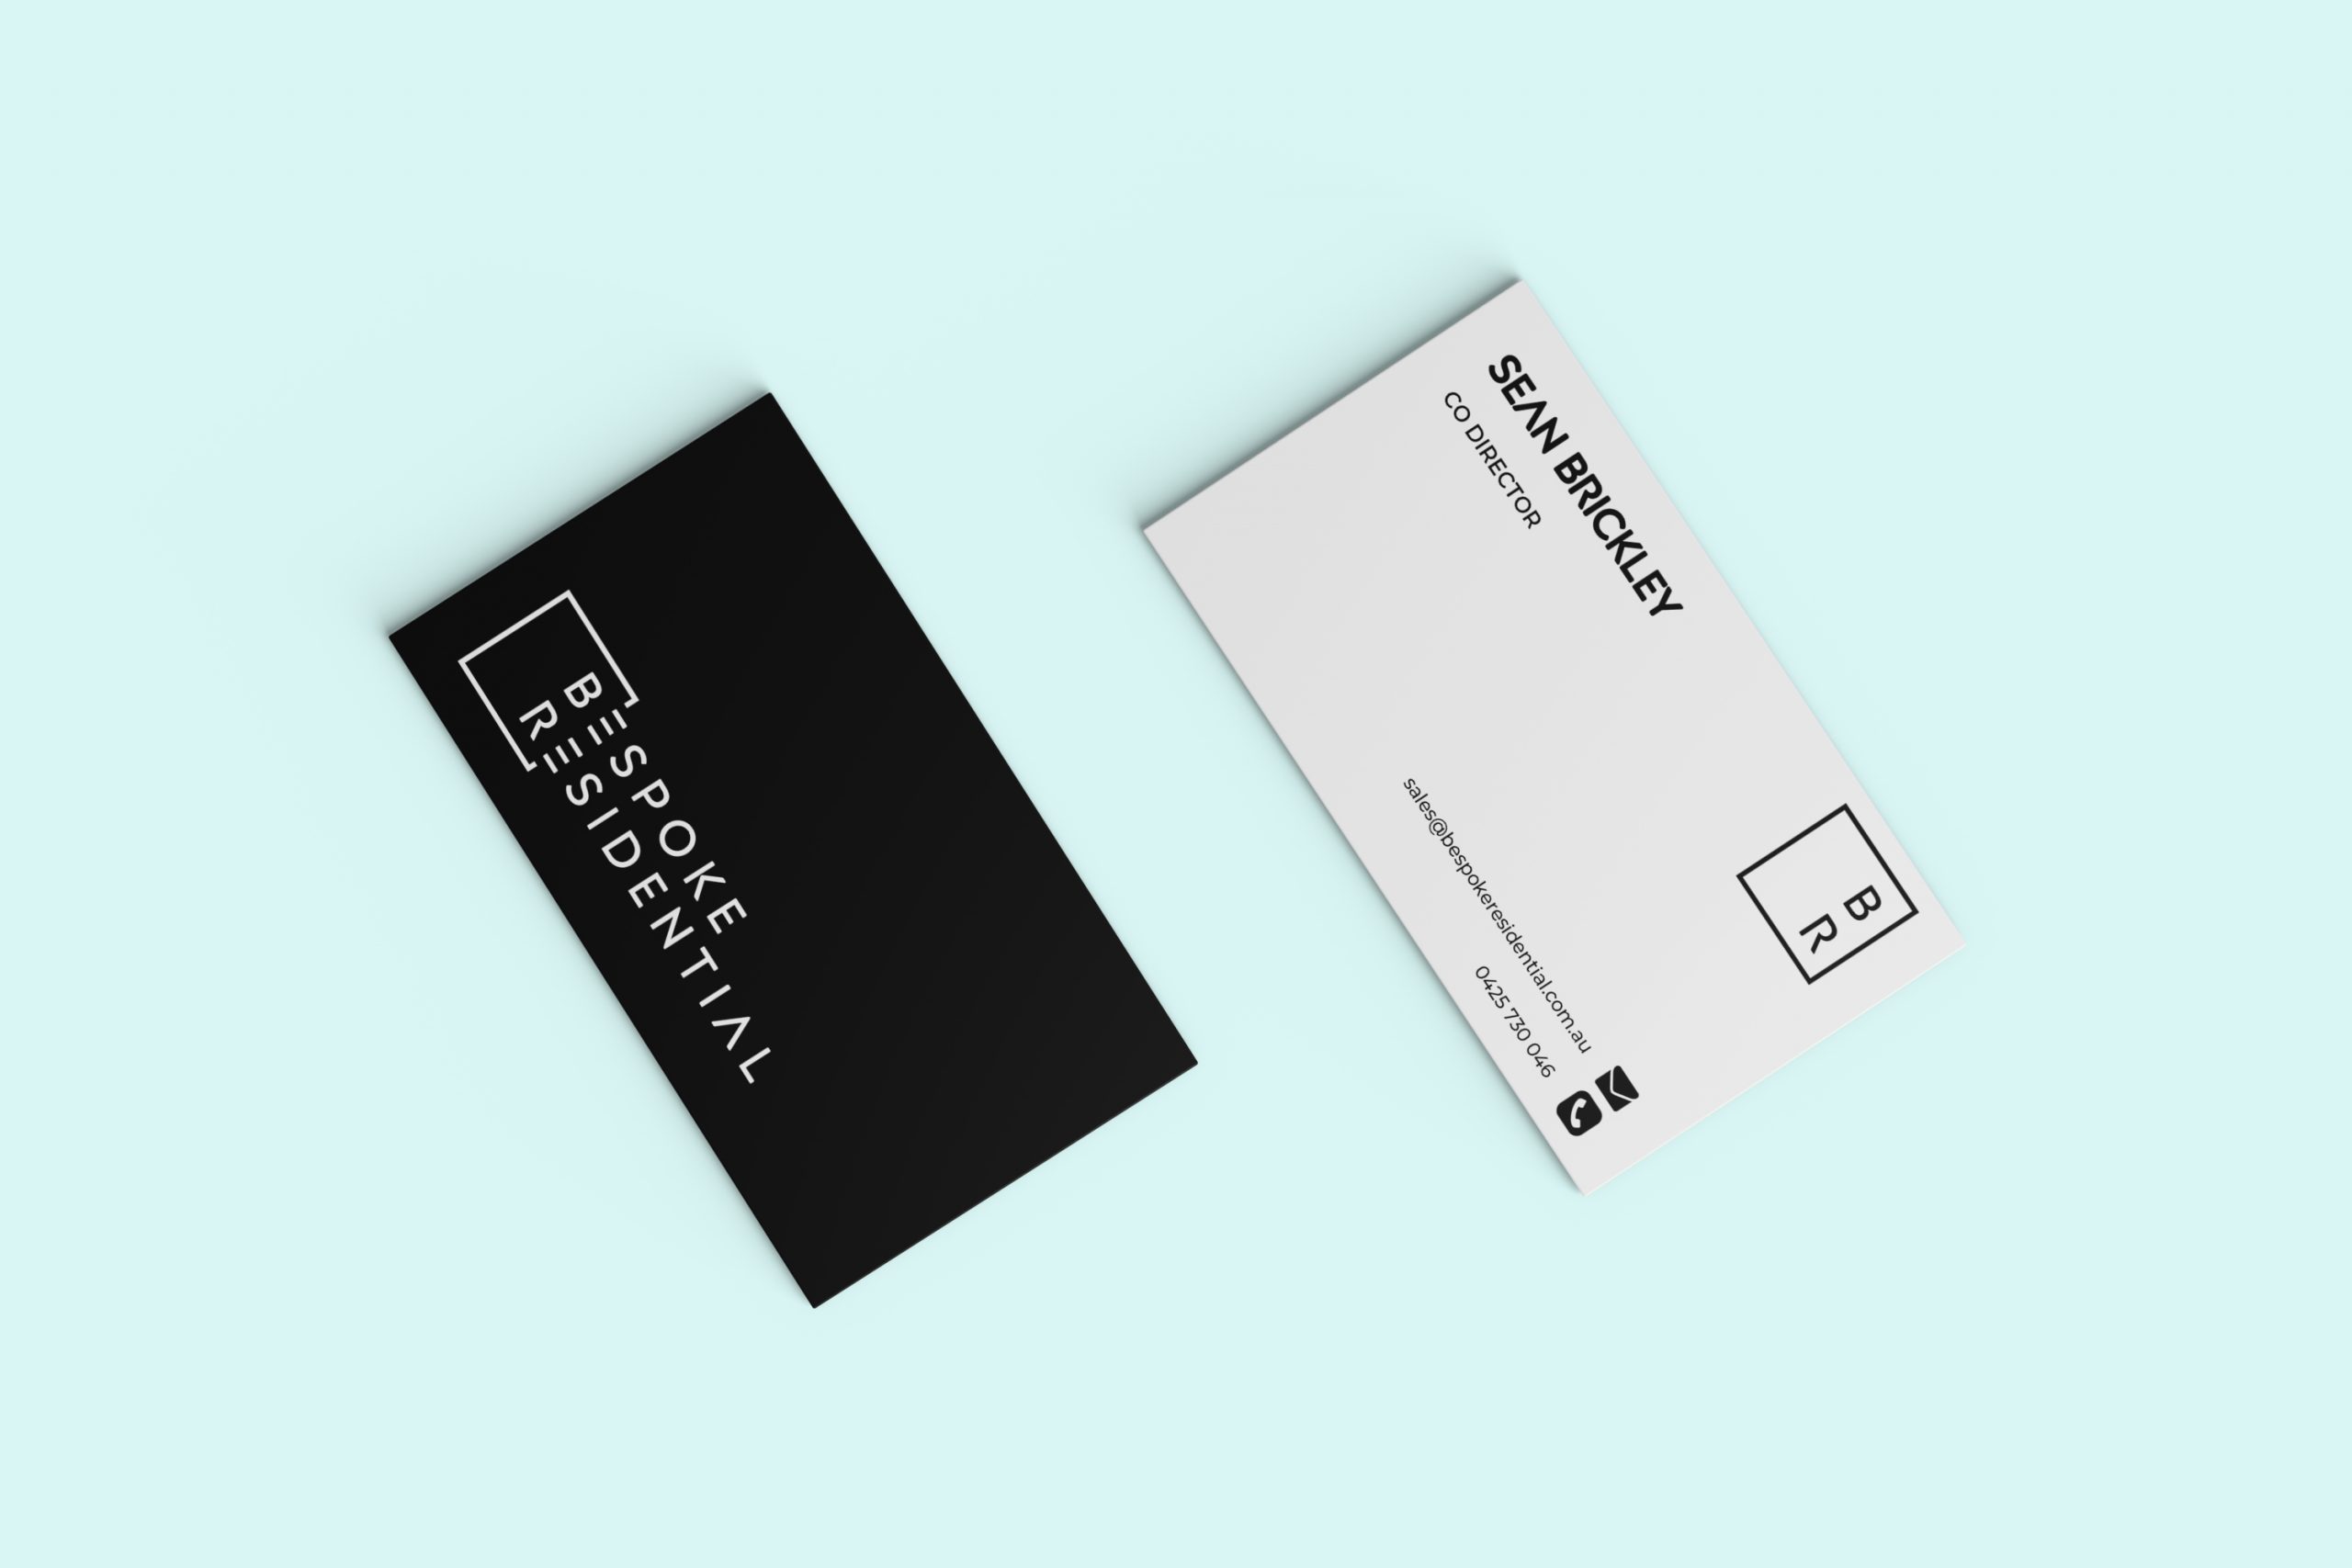 Bespoke Residential Business Card Mockup scaled